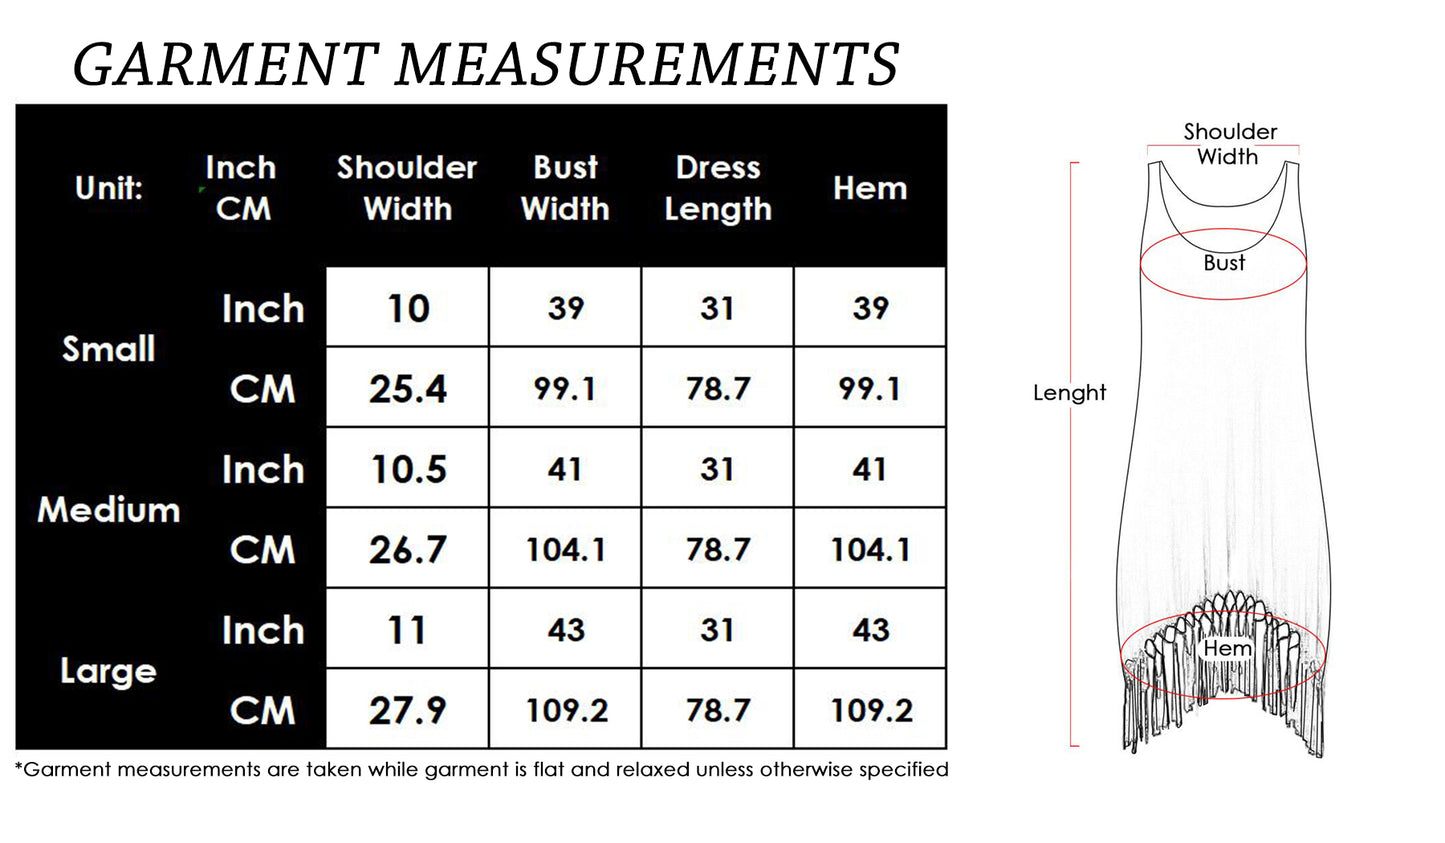 Summer Sleeveless Tank Dress Casual Tassel Solid Color Swing T-Shirt Dresses Beach Cover Up